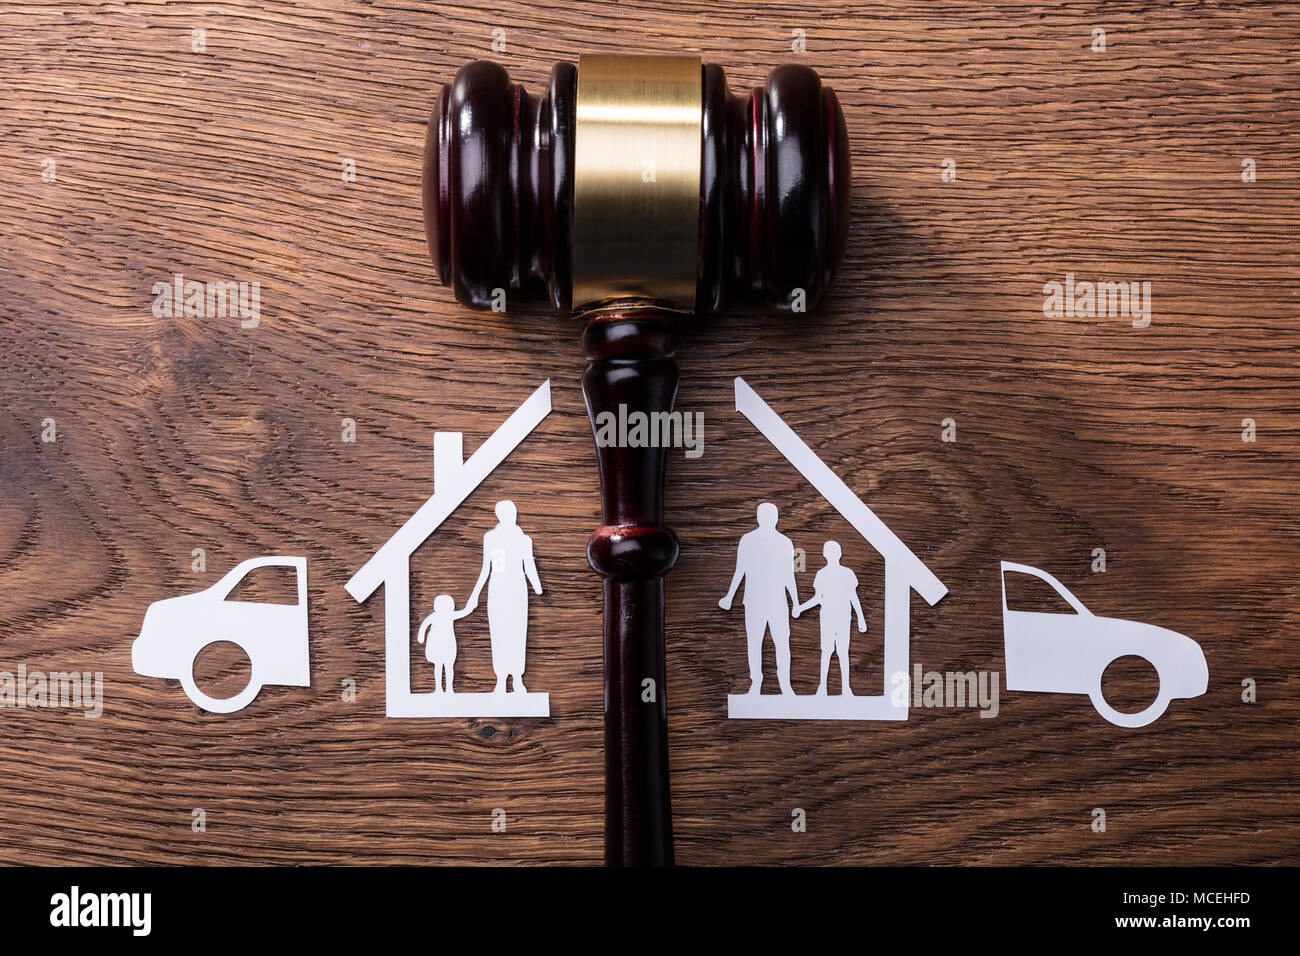 Judge Mallet Between The Split Paper Cutout Family And Car On Wooden Desk Stock Photo